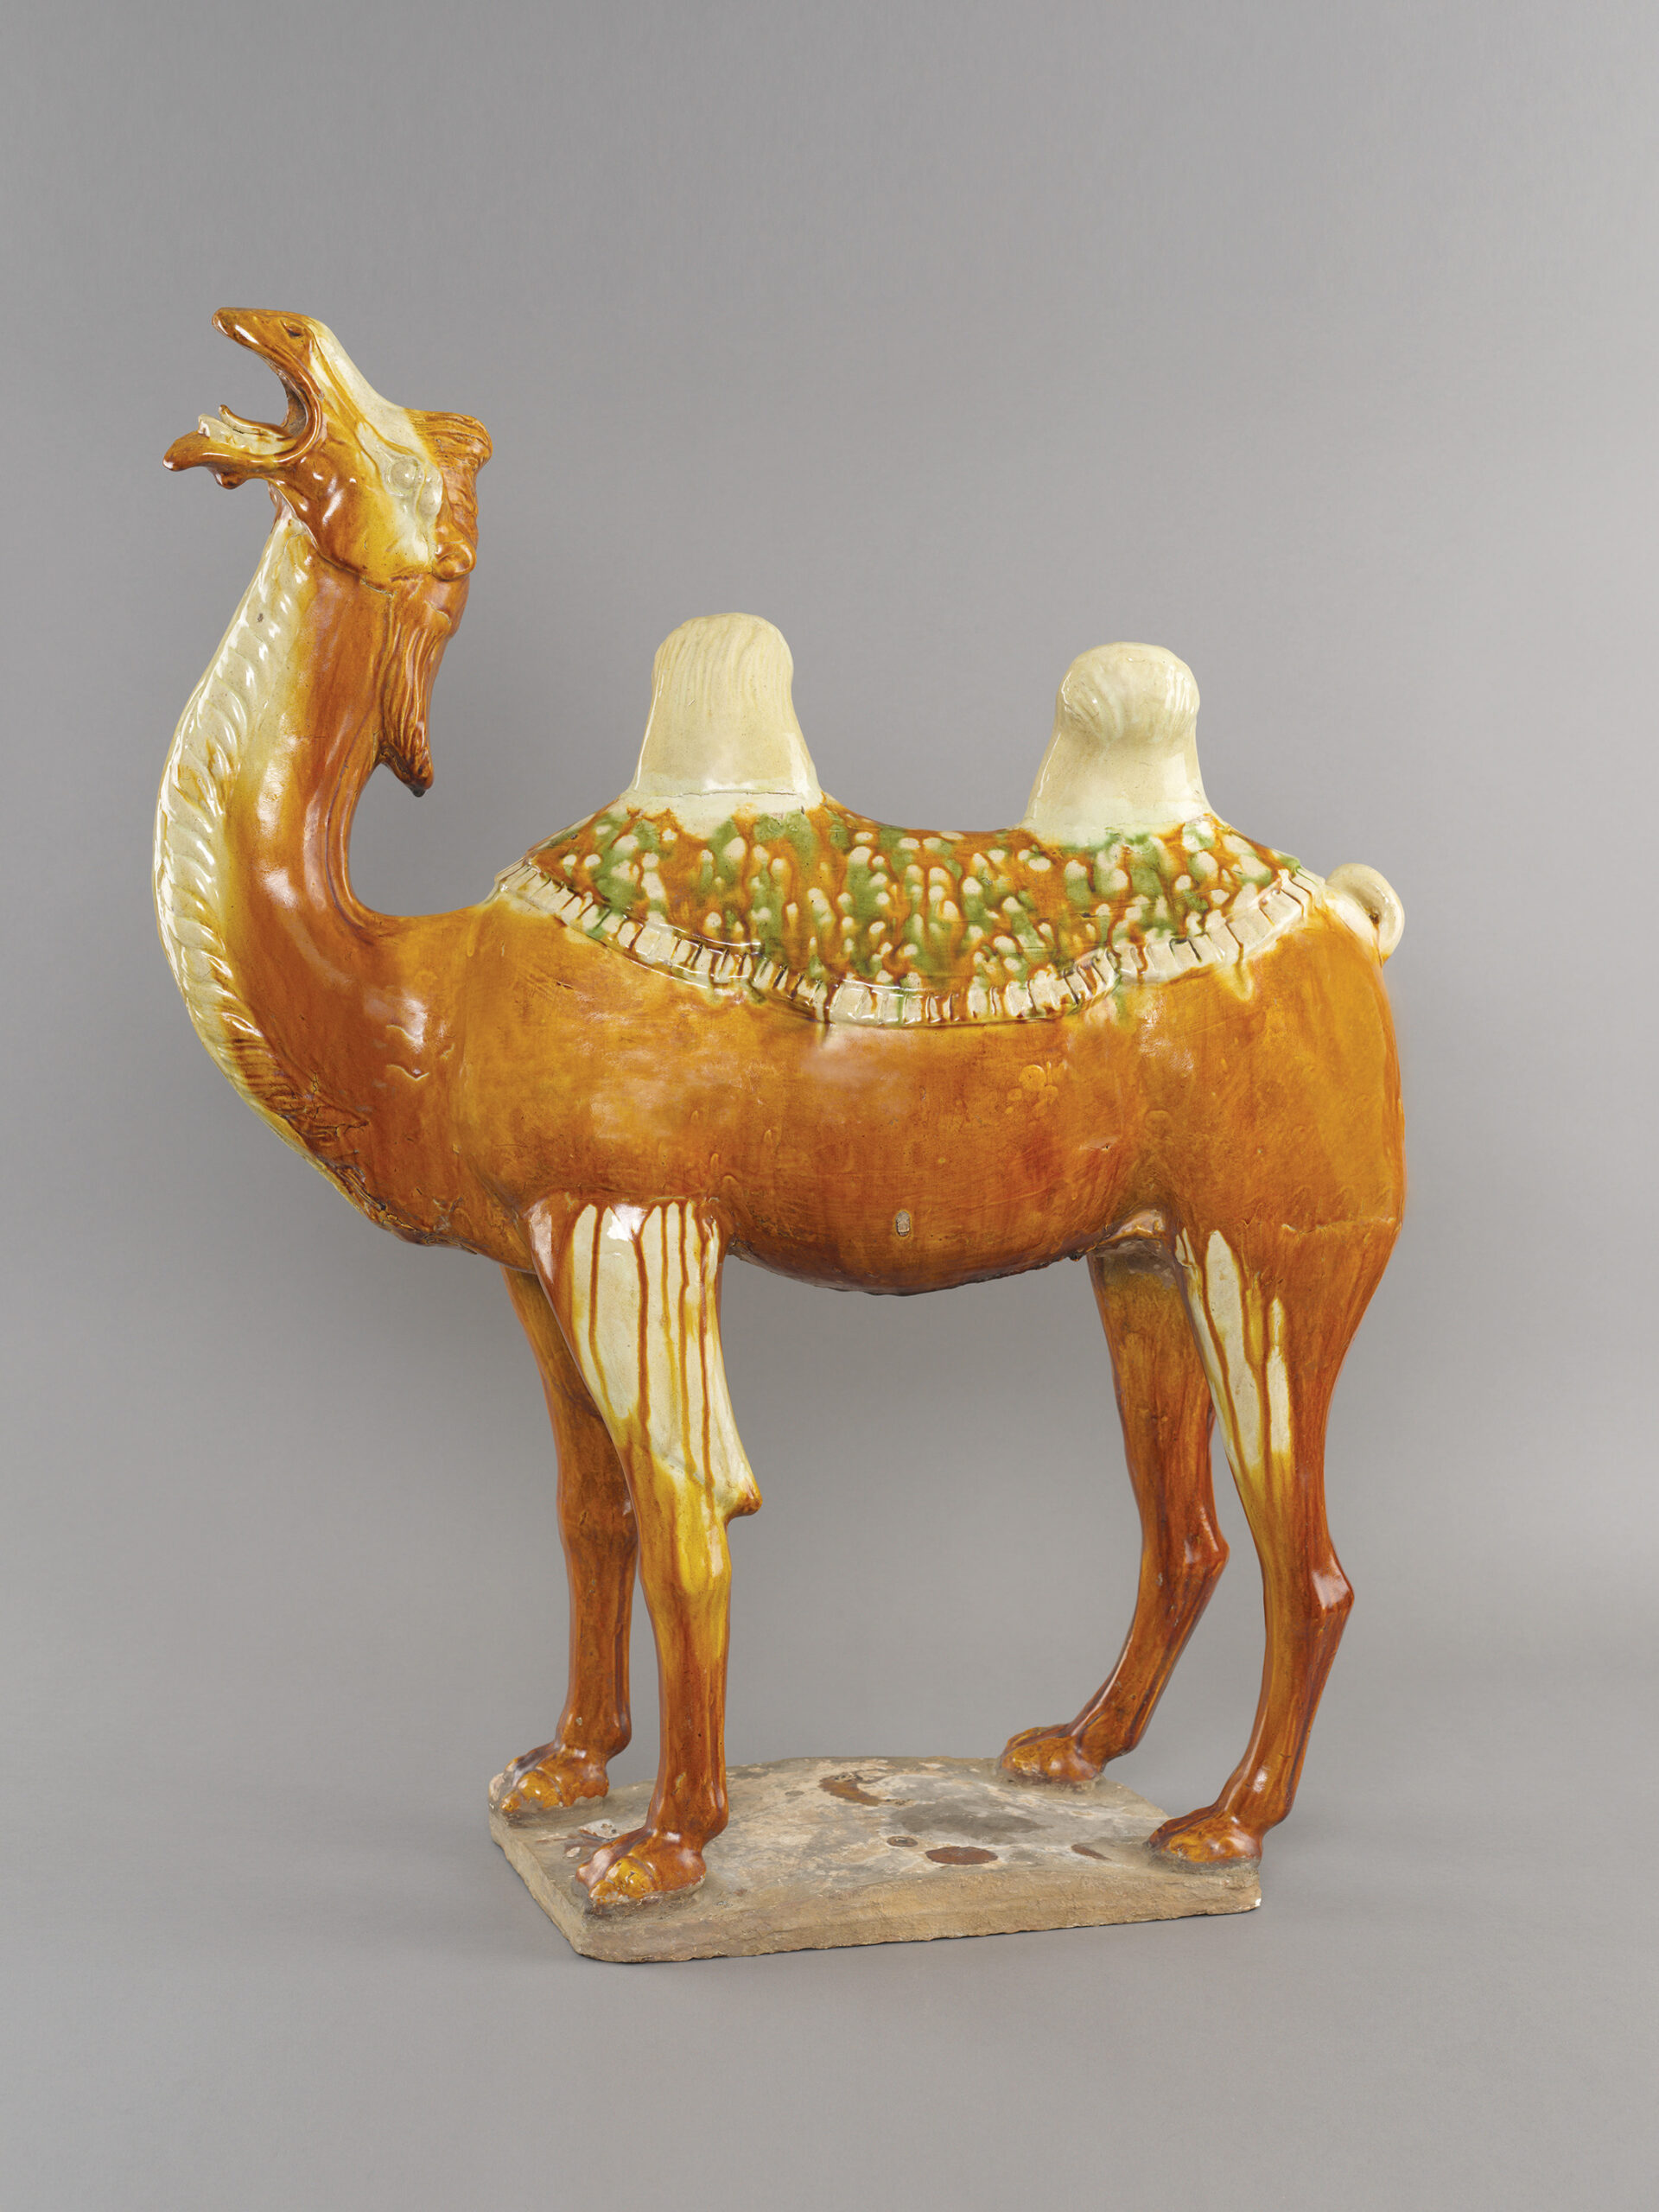 No. 10 - Large Chinese pottery sancai, three-colour glazed Bactrian camel, the body predominantly of rich amber glaze, standing with its head raised back with wide open mouth, flared nostrils and bulging eyes, a swept-back mane and flowing hair behind its head, the neck with long strands of hair combed to both sides and heightened in a straw glaze, wearing a three-colour splashed saddle cloth pleated at the edge beneath its straw-glazed tufted humps swaying in each direction, the top of the legs and the tail also heightened in straw glaze, the base unglazed with original drips of glaze. 32 5/8 inches, 83 cm high. Tang dynasty, early 8th century.